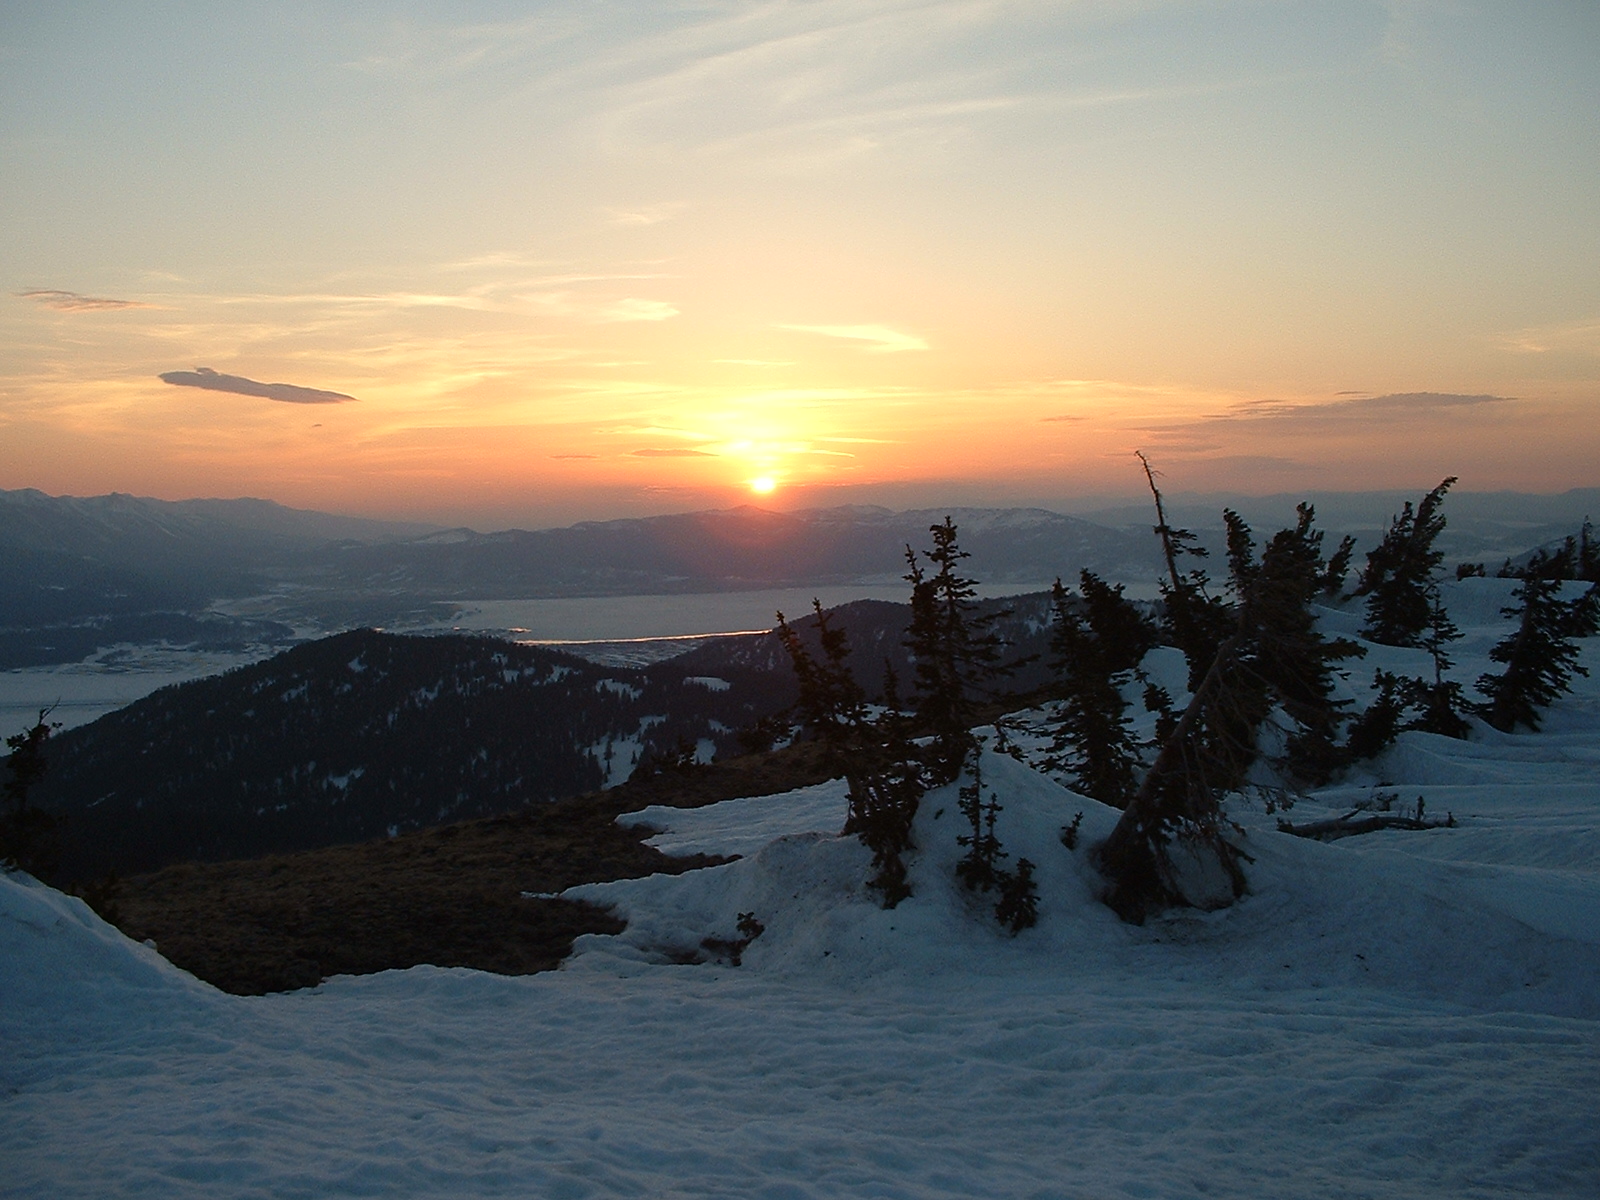 Sunset on Two Top Mountain